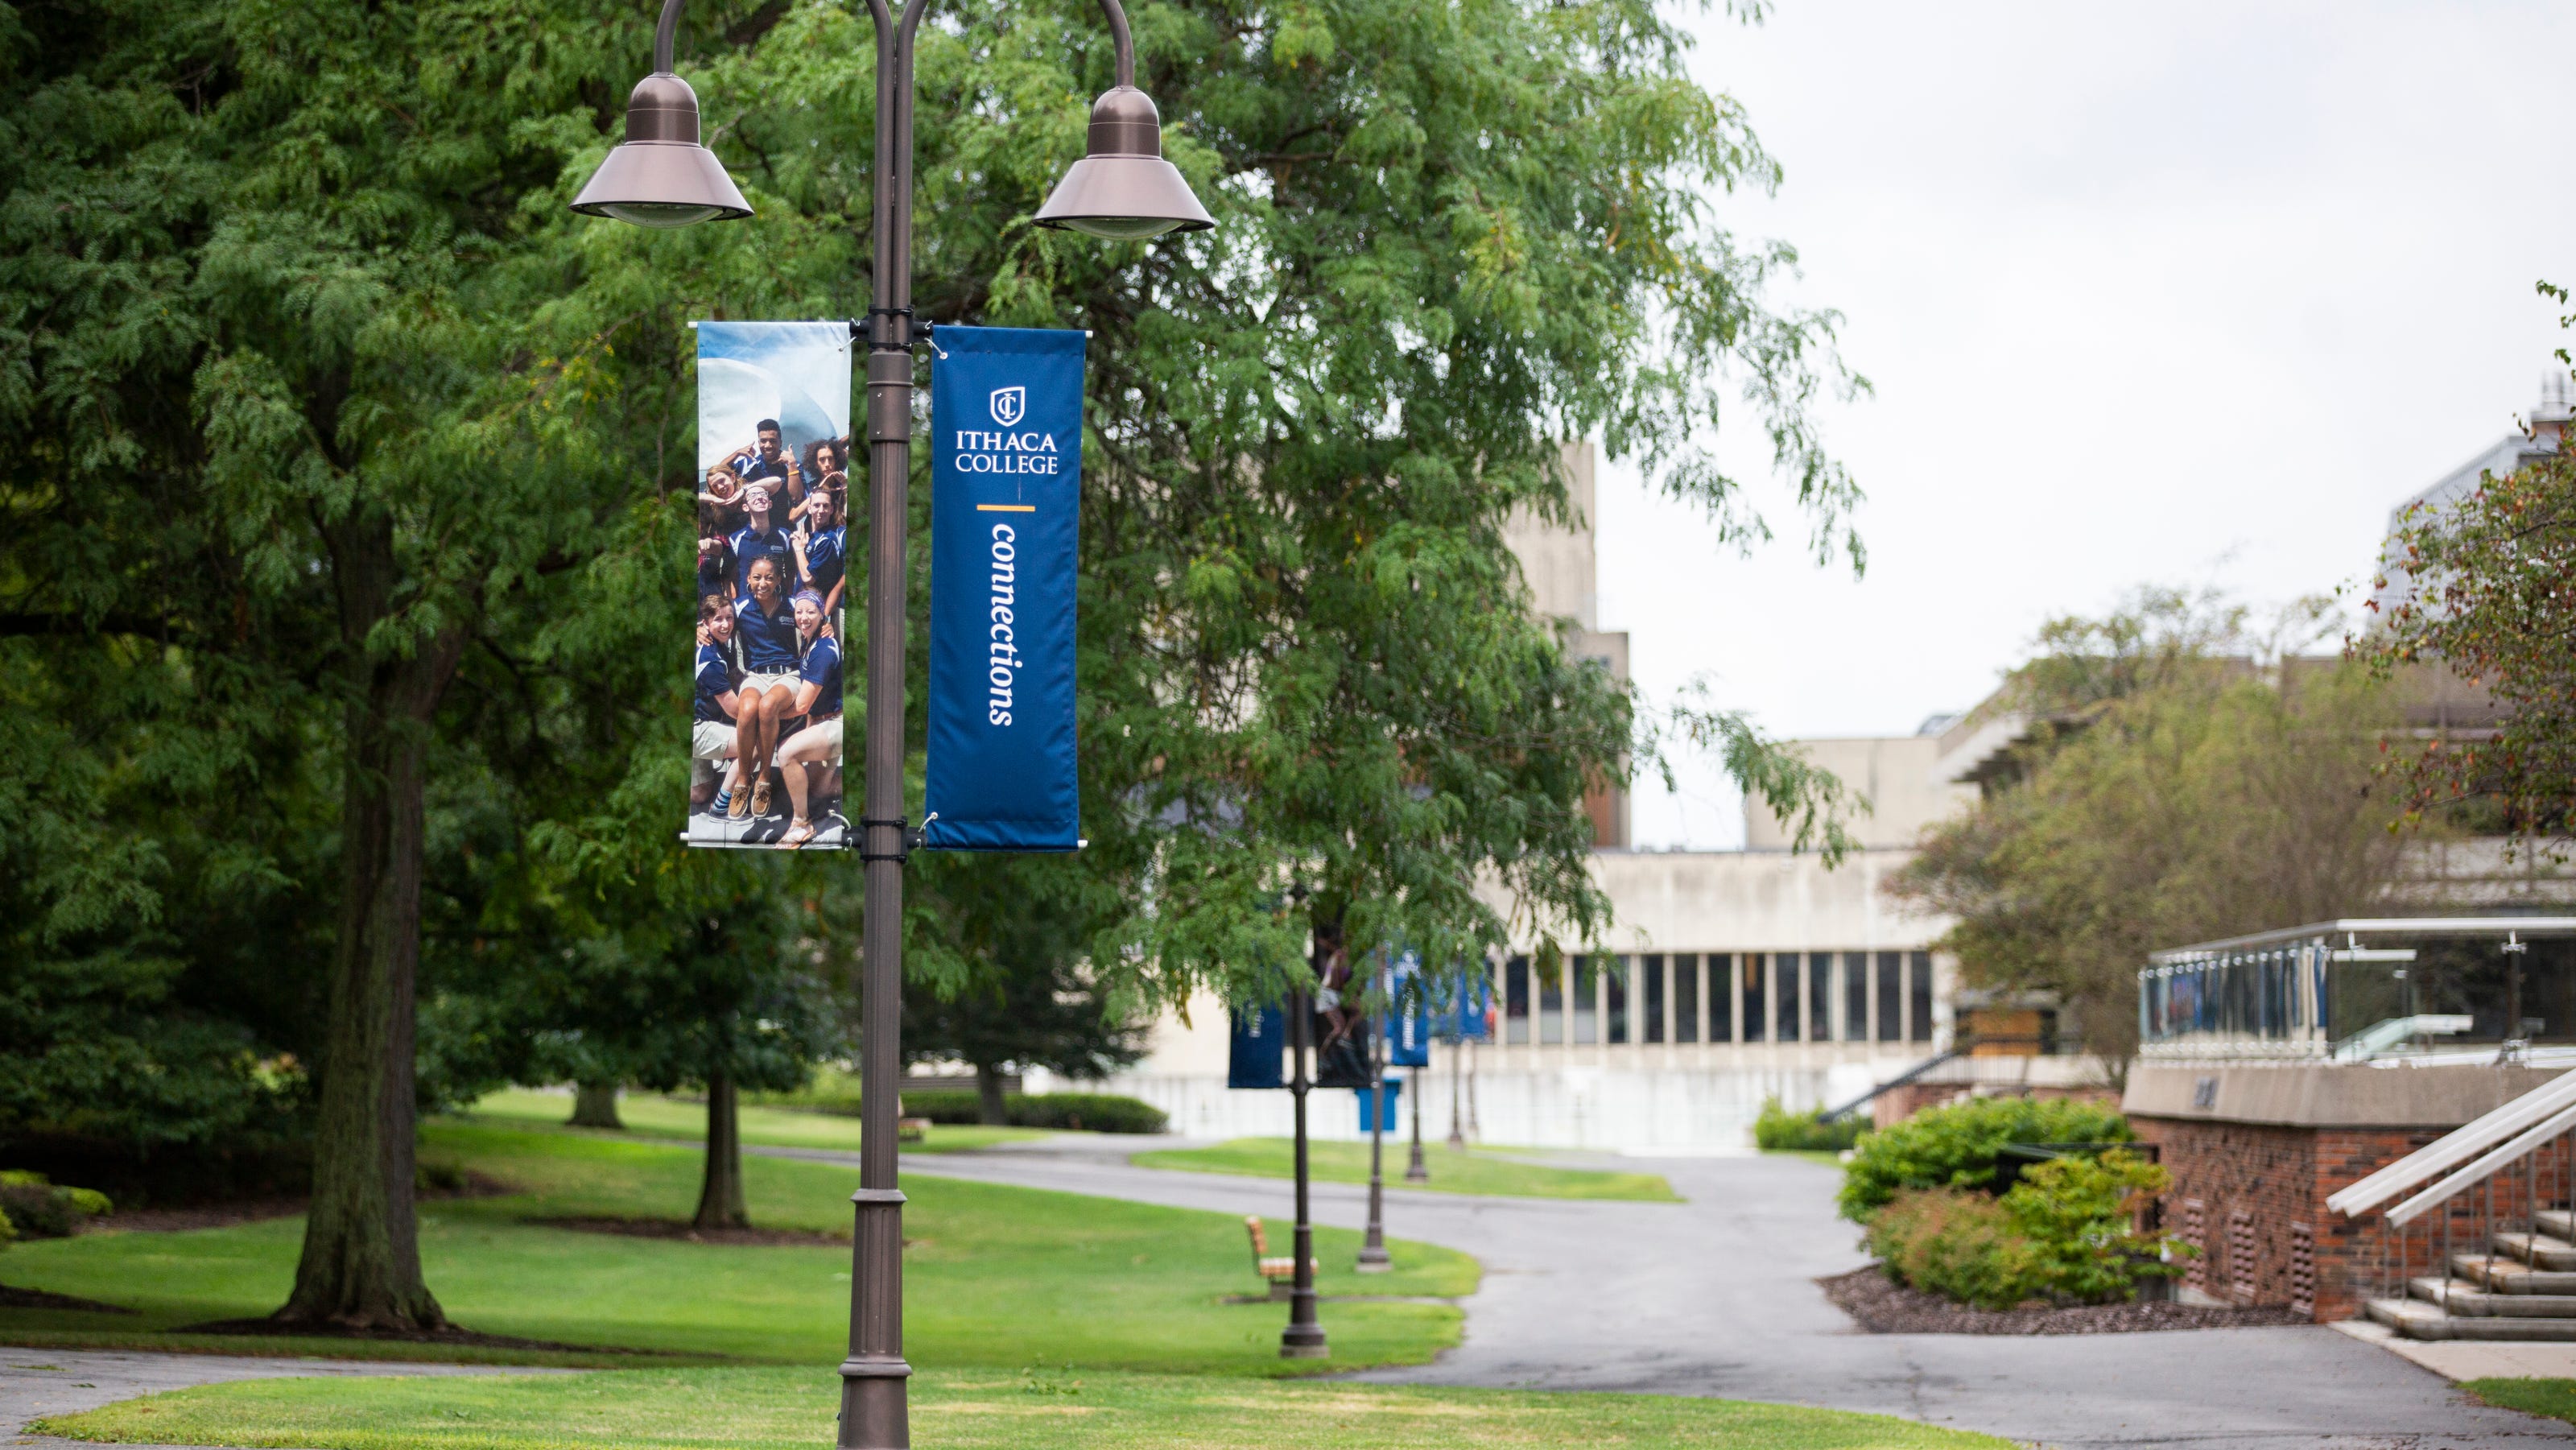 ithaca-college-to-cut-more-than-100-jobs-due-to-drop-in-enrollment